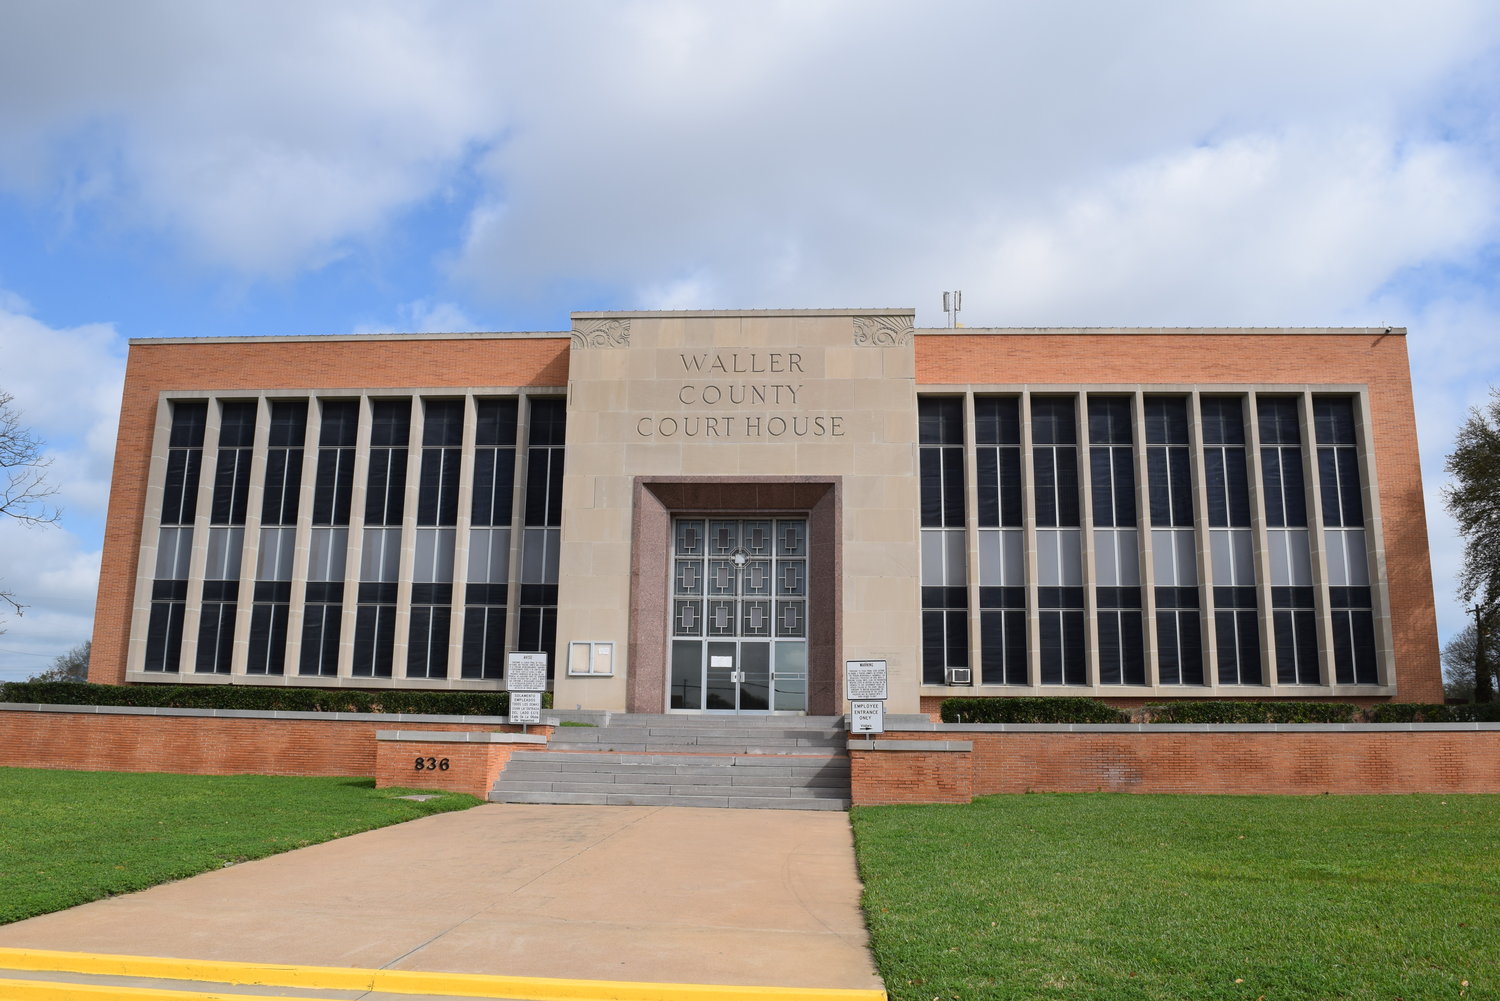 Waller County commissioners discussed construction and renovation of county facilities, the COVID-19 pandemic and accepted a criminal justice grant of more than $100,000. The meeting was held via teleconference to observe social distancing rather than at the county courthouse (pictured above).